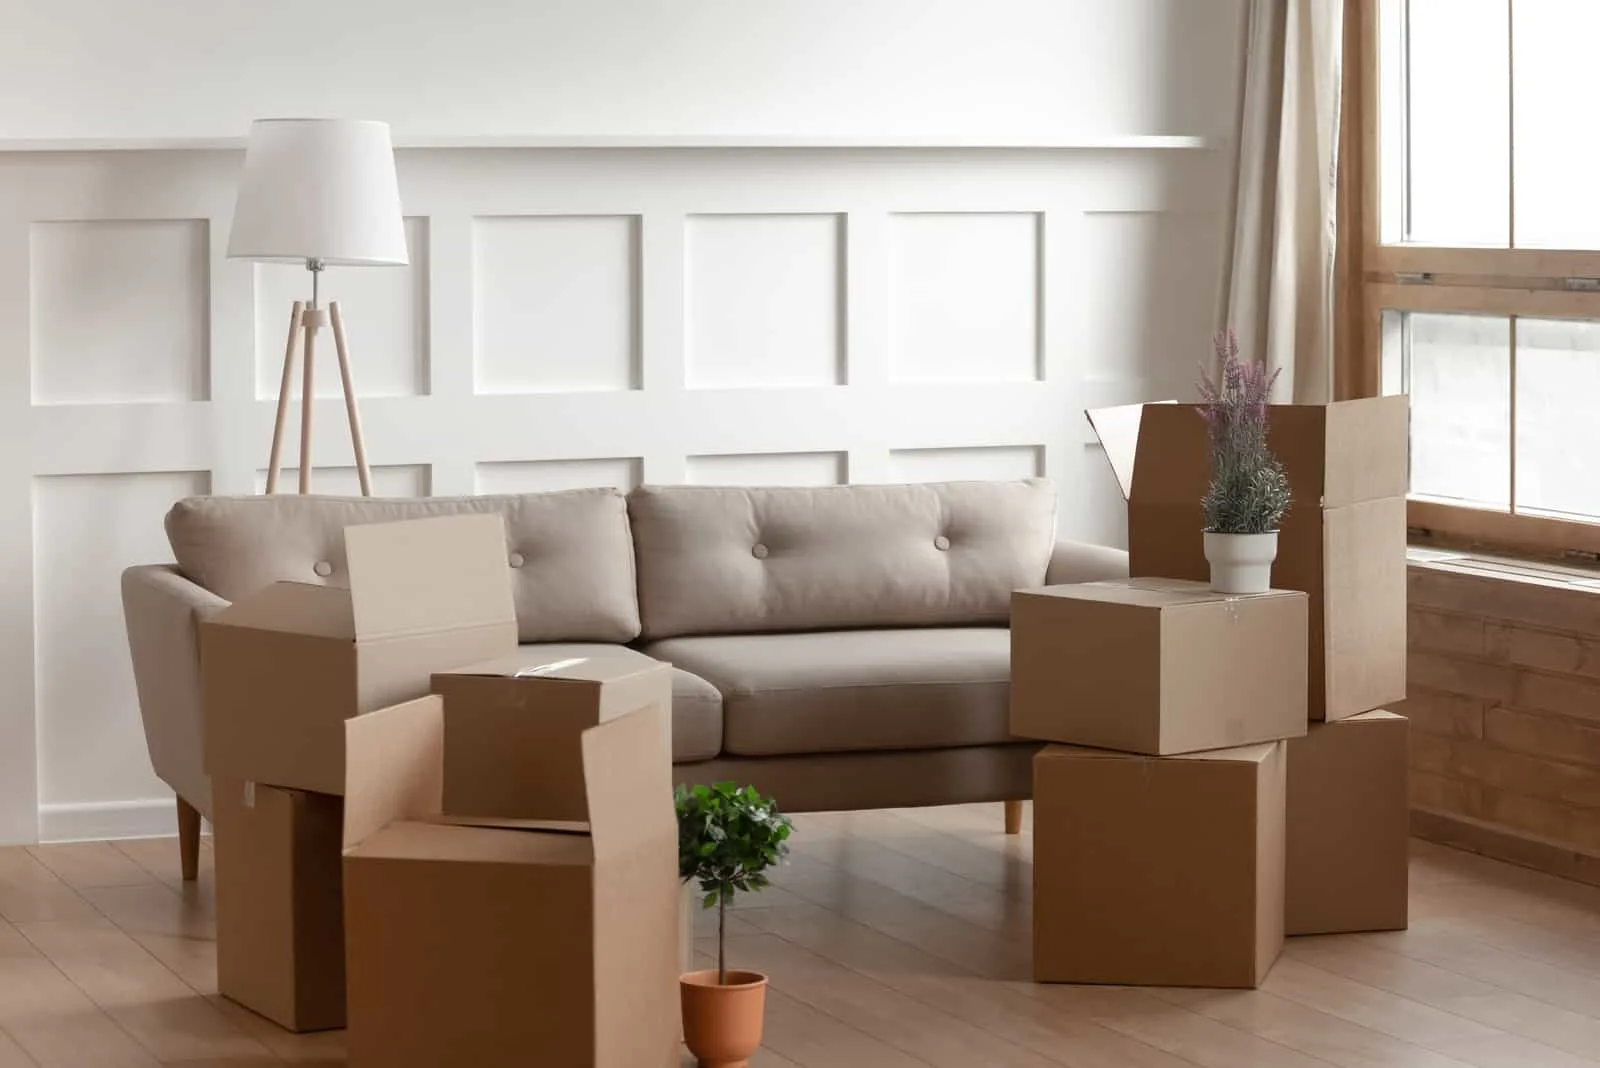 Big cardboard boxes, domestic flowers potted plants, floor lamp and comfortable couch inside of modern living room, no people